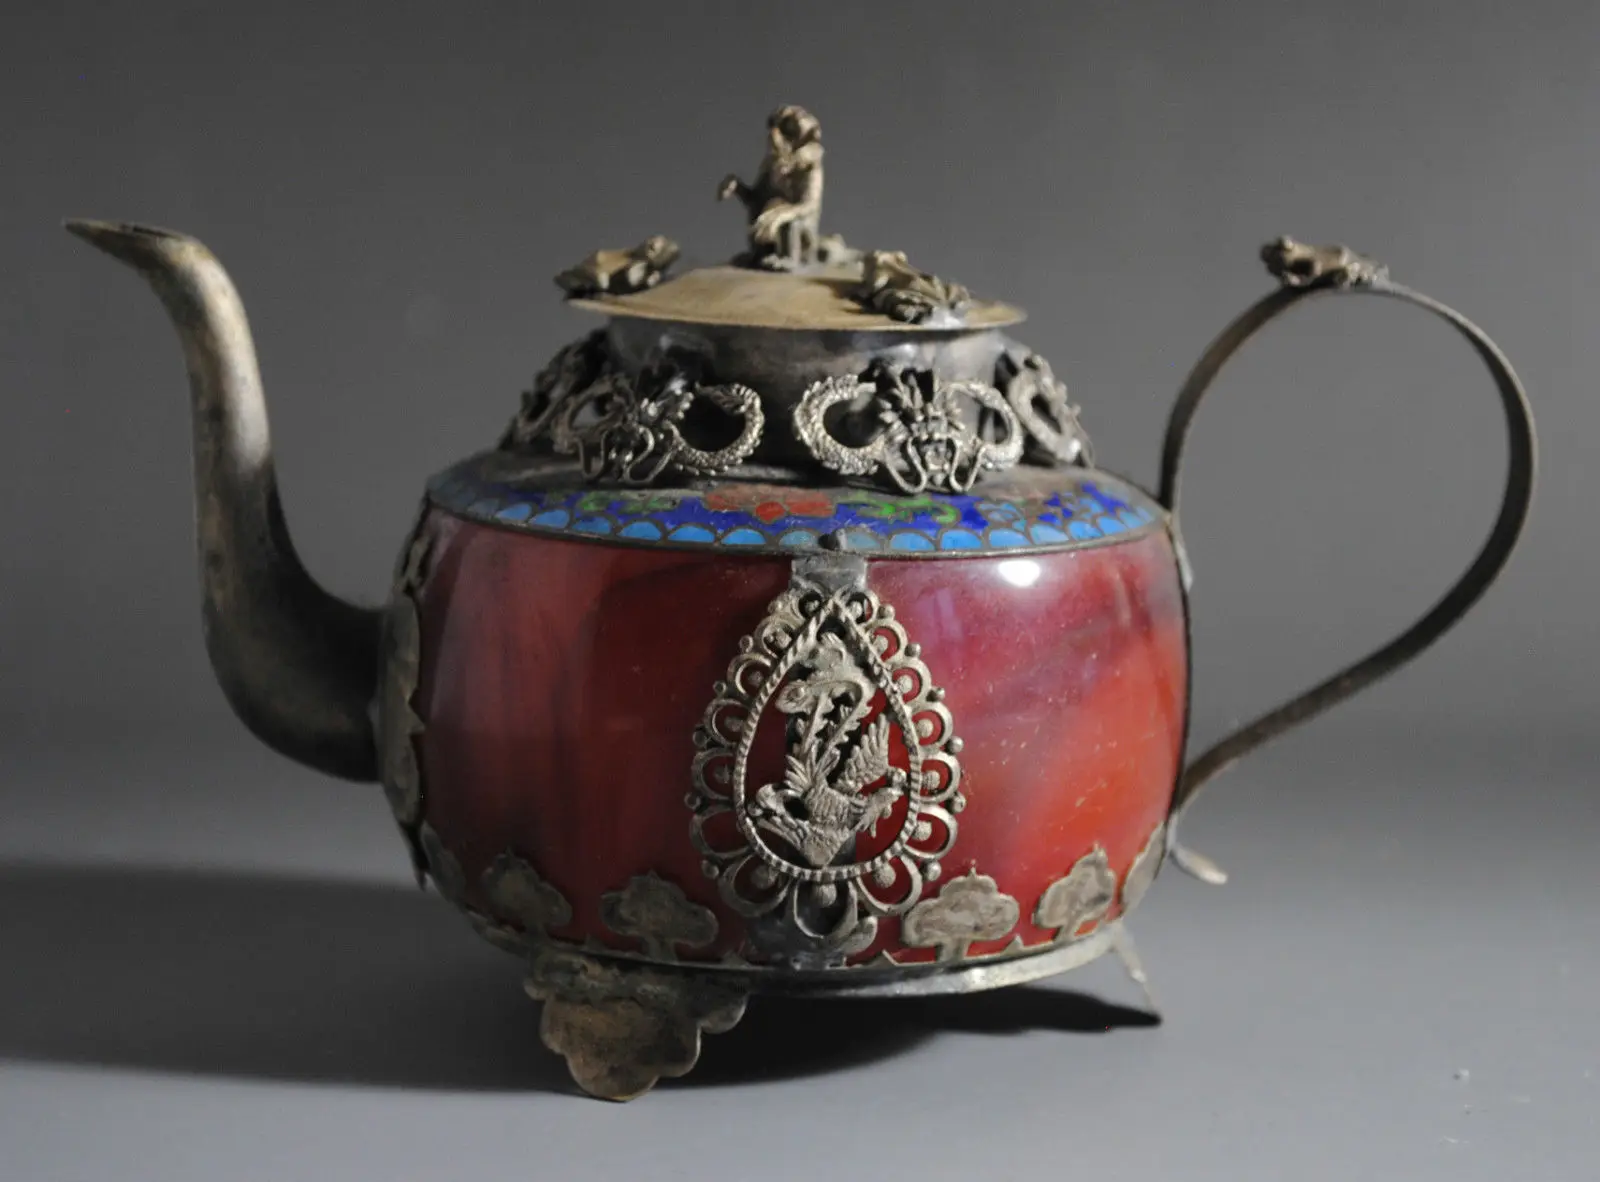 

Vintage,OLD JADE ARMORED TIBETAN SILVER WITH MONKEY LID DECORATION TEAPOT